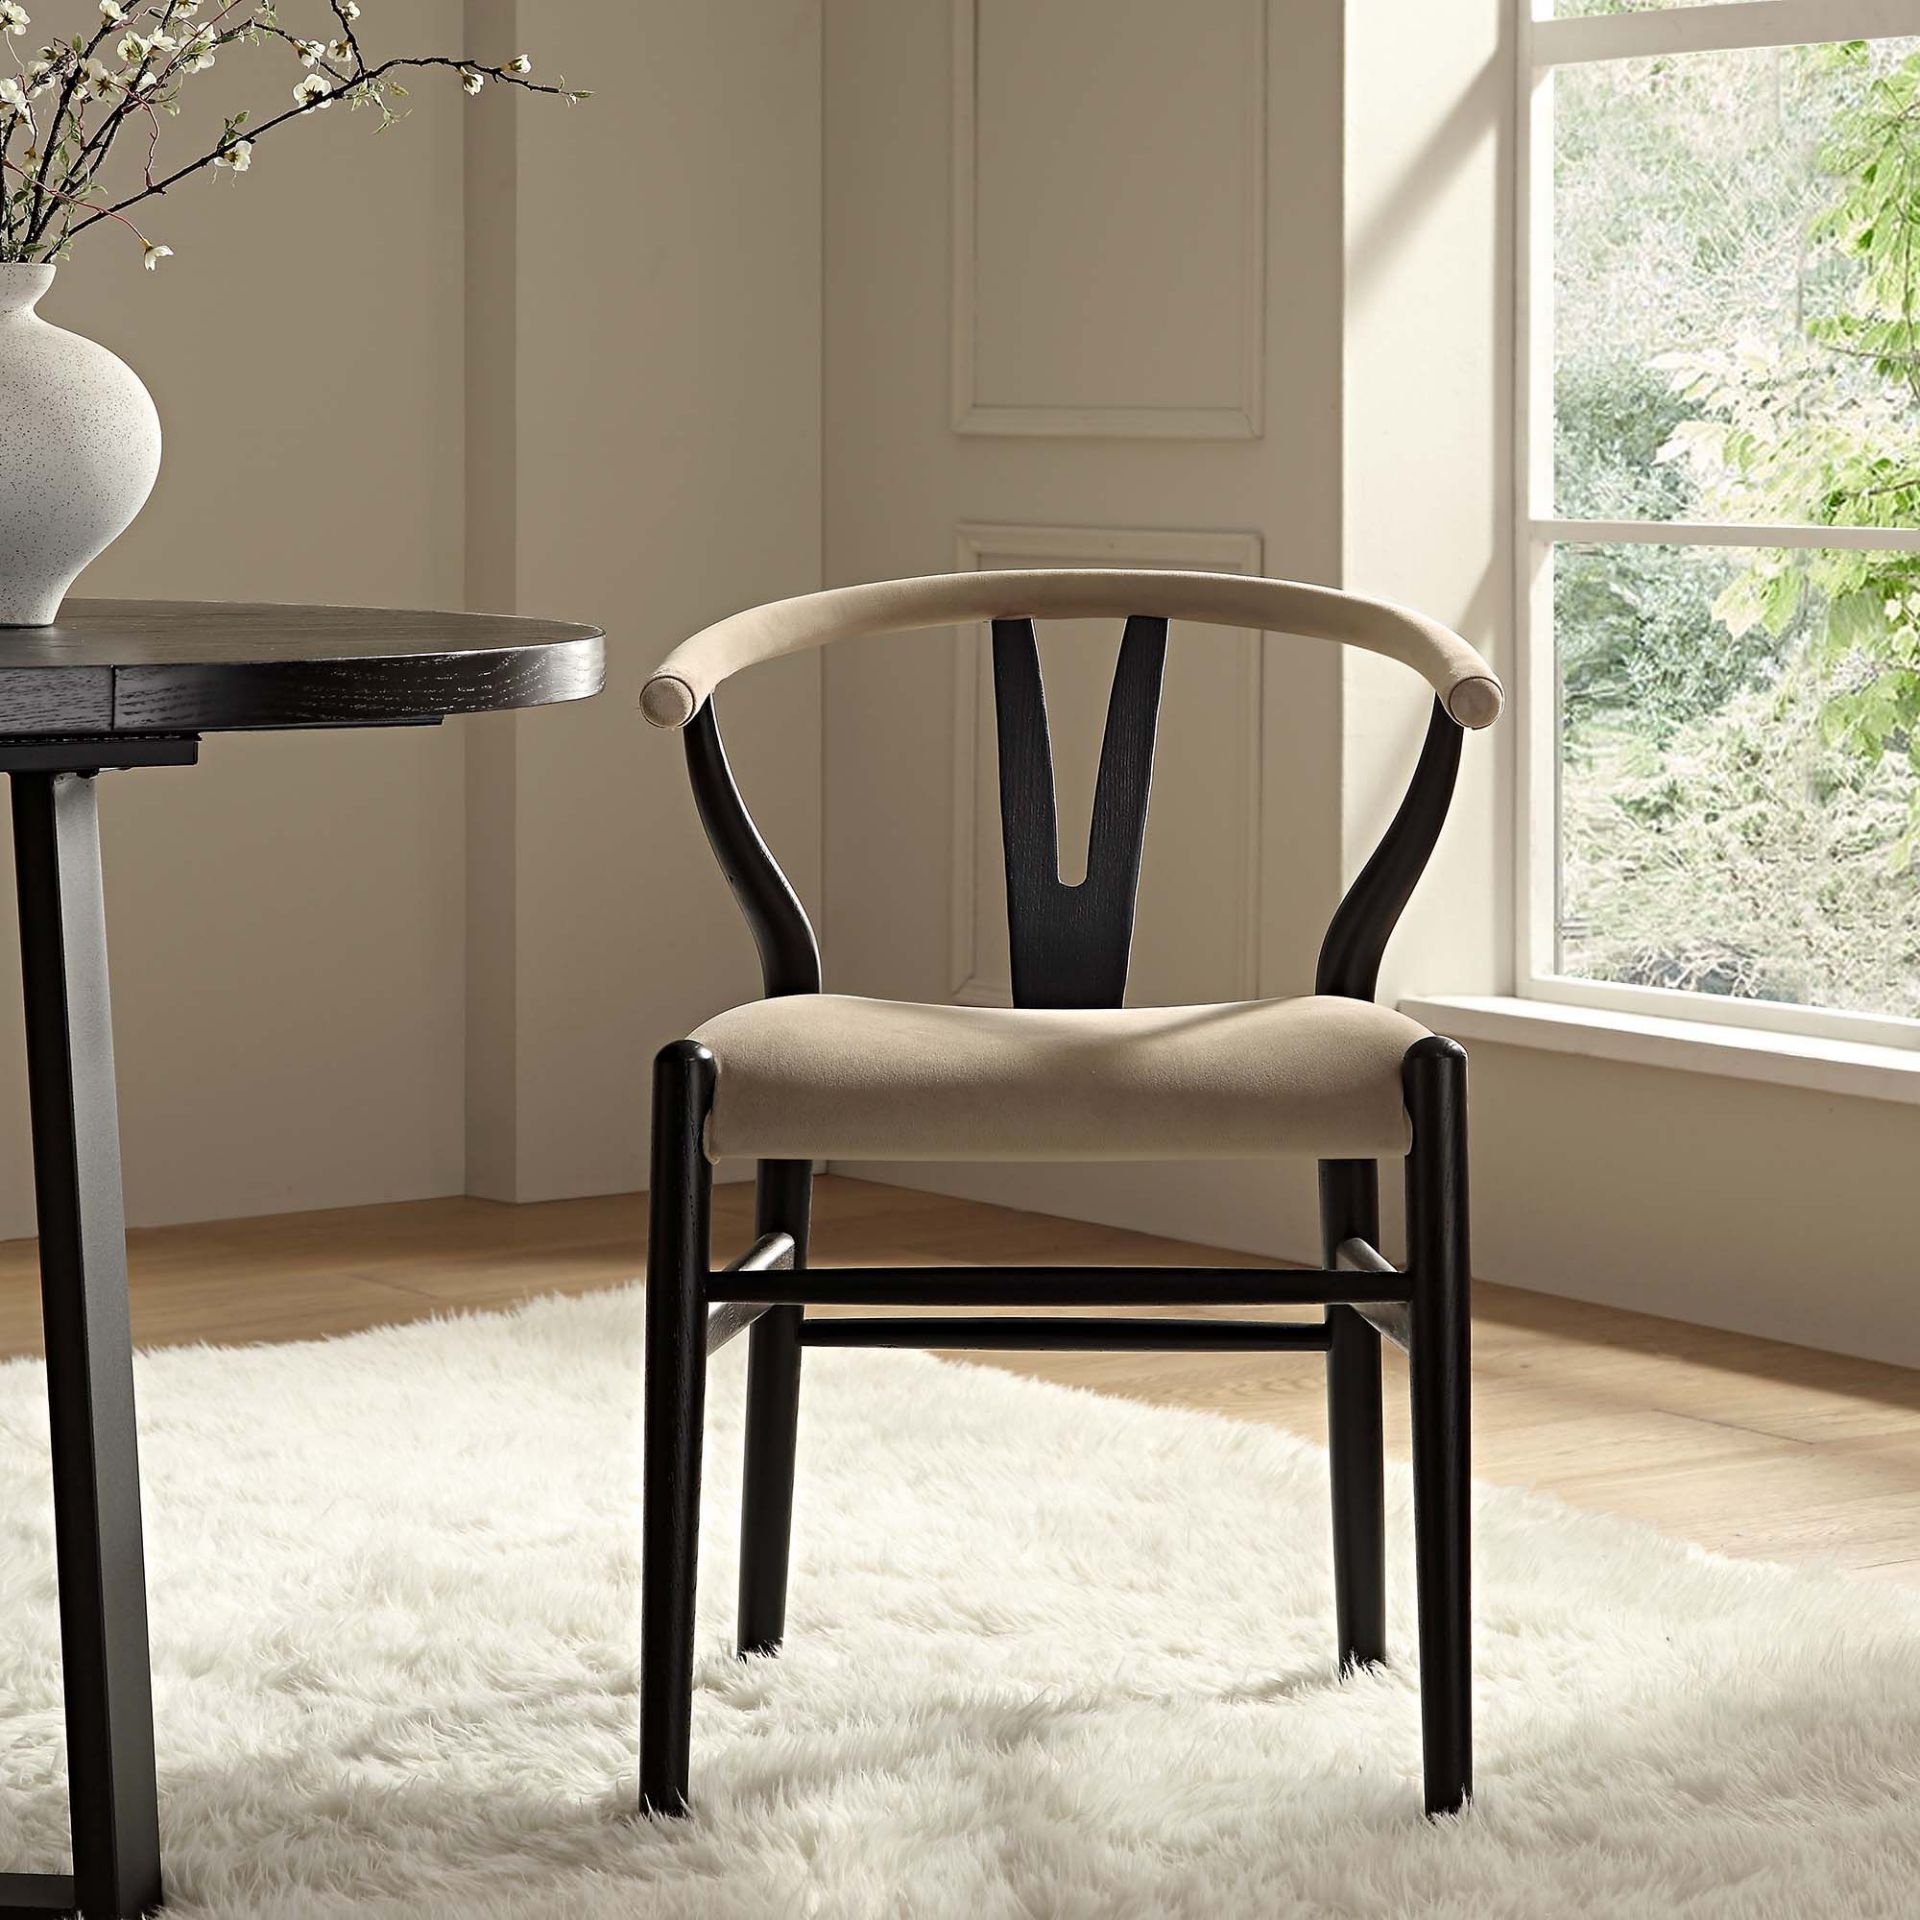 Hansel Wishbone Padded Dining Chair, Taupe Velvet and Black Frame. - R13.7. RRP £219.99. Inspired by